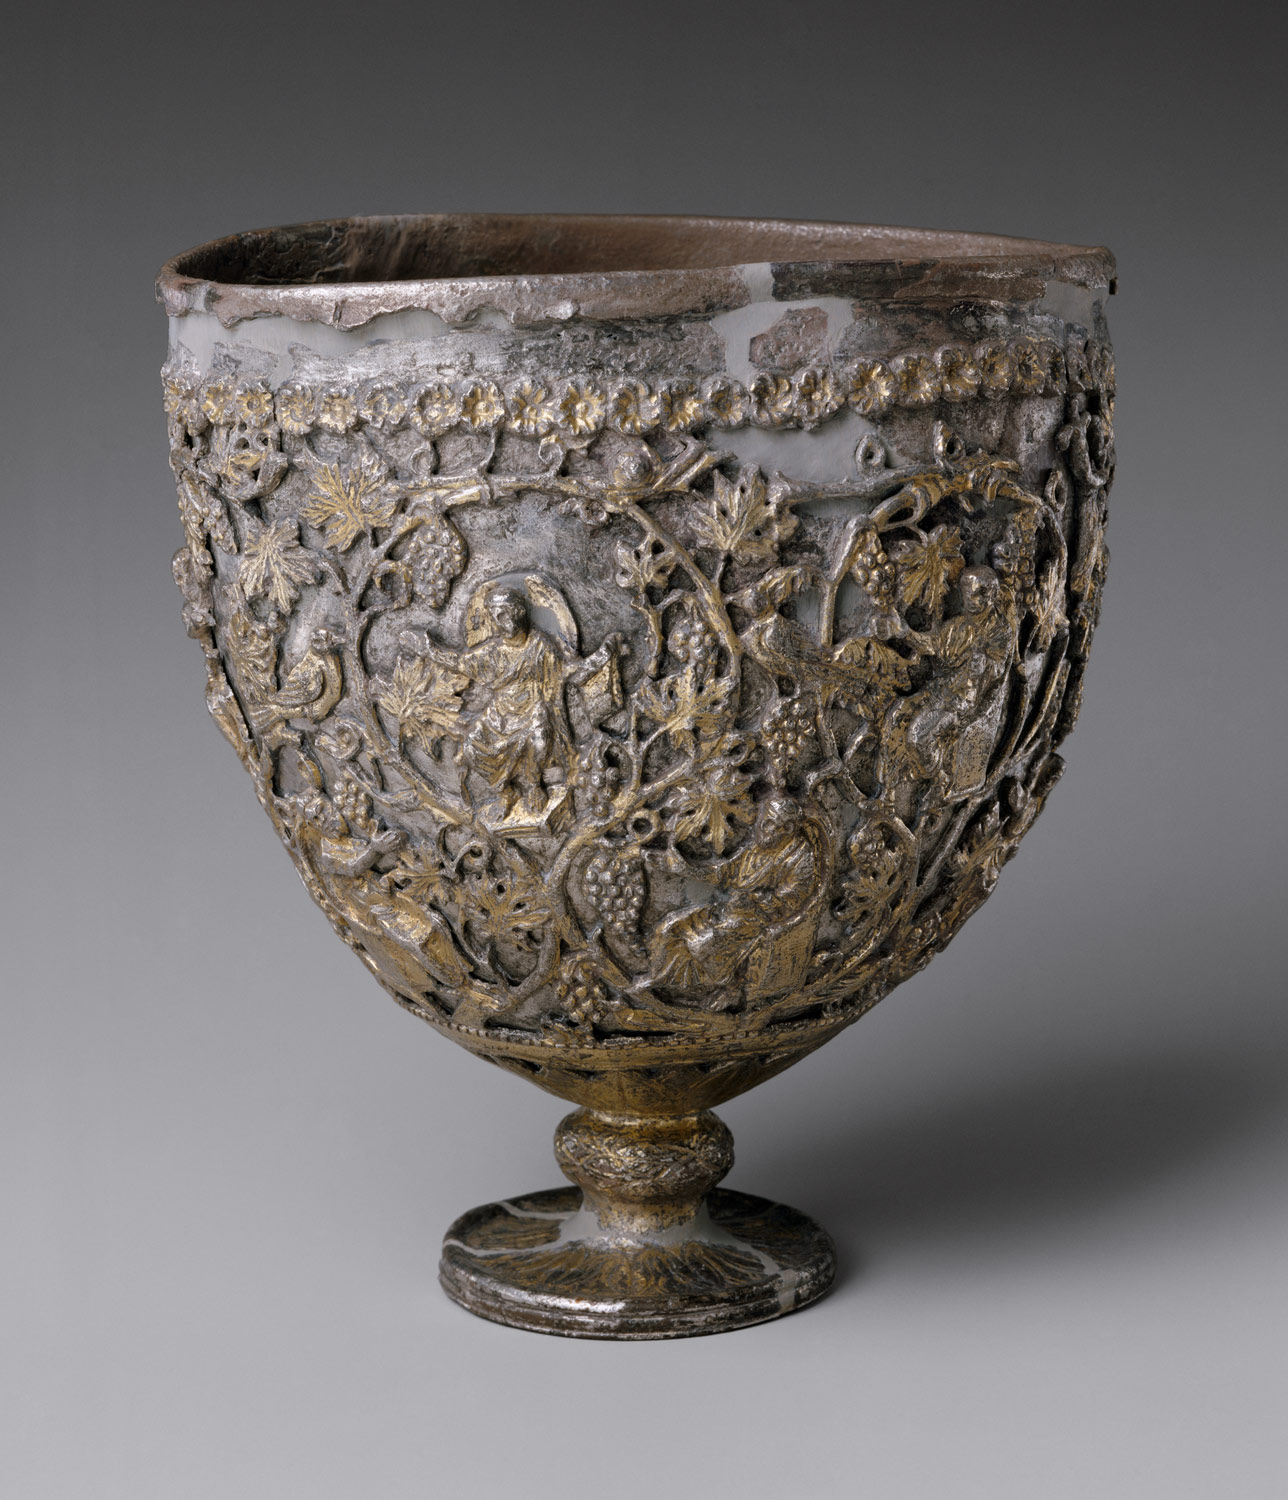 The Antioch Chalice